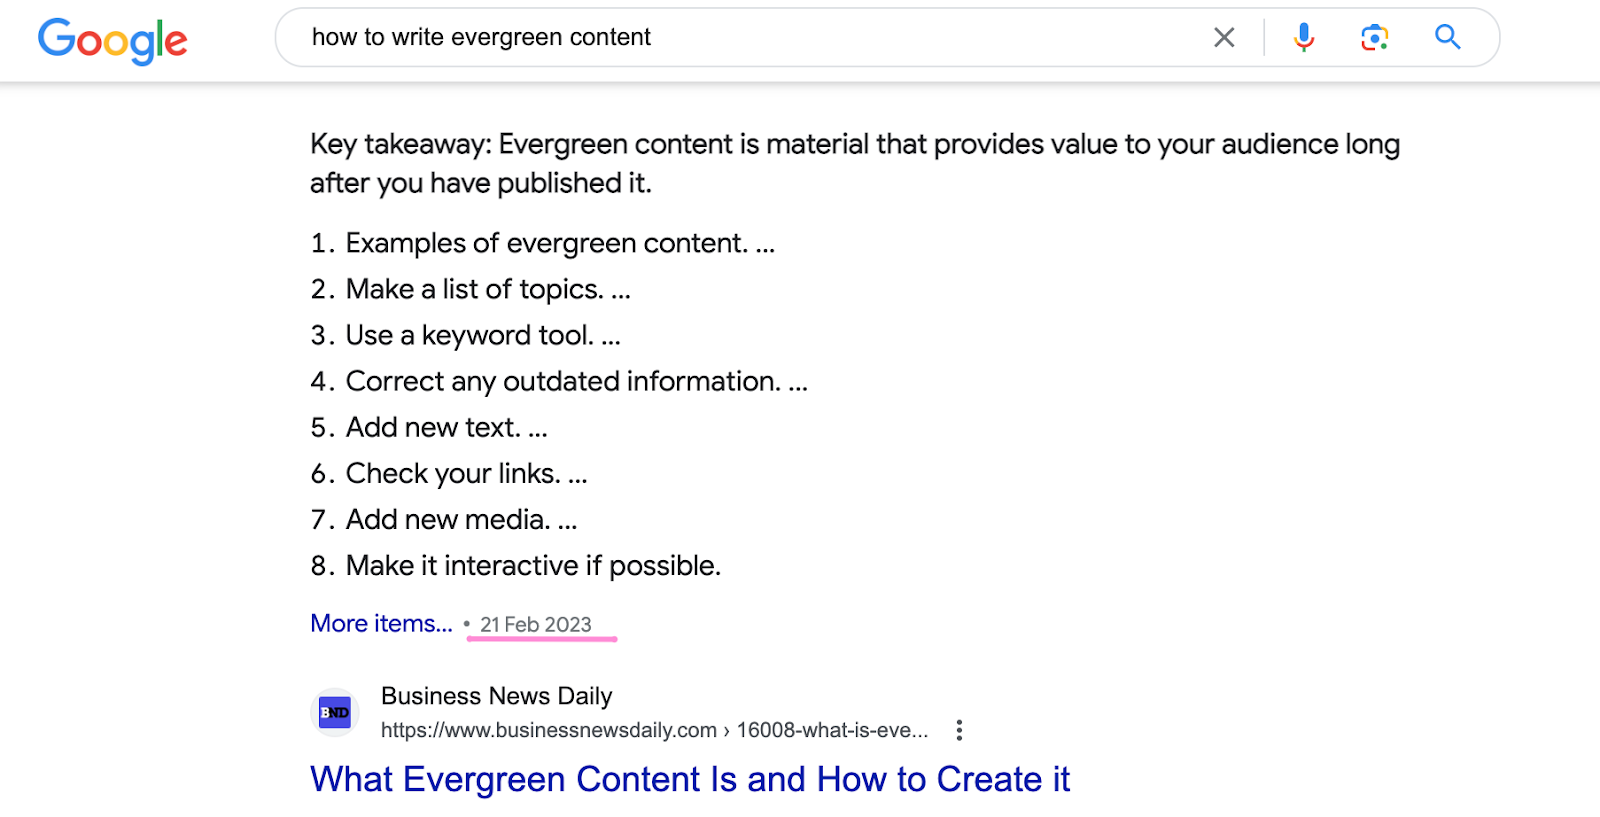 A screenshot featuring the search results for the query “how to write evergreen content” on Google.